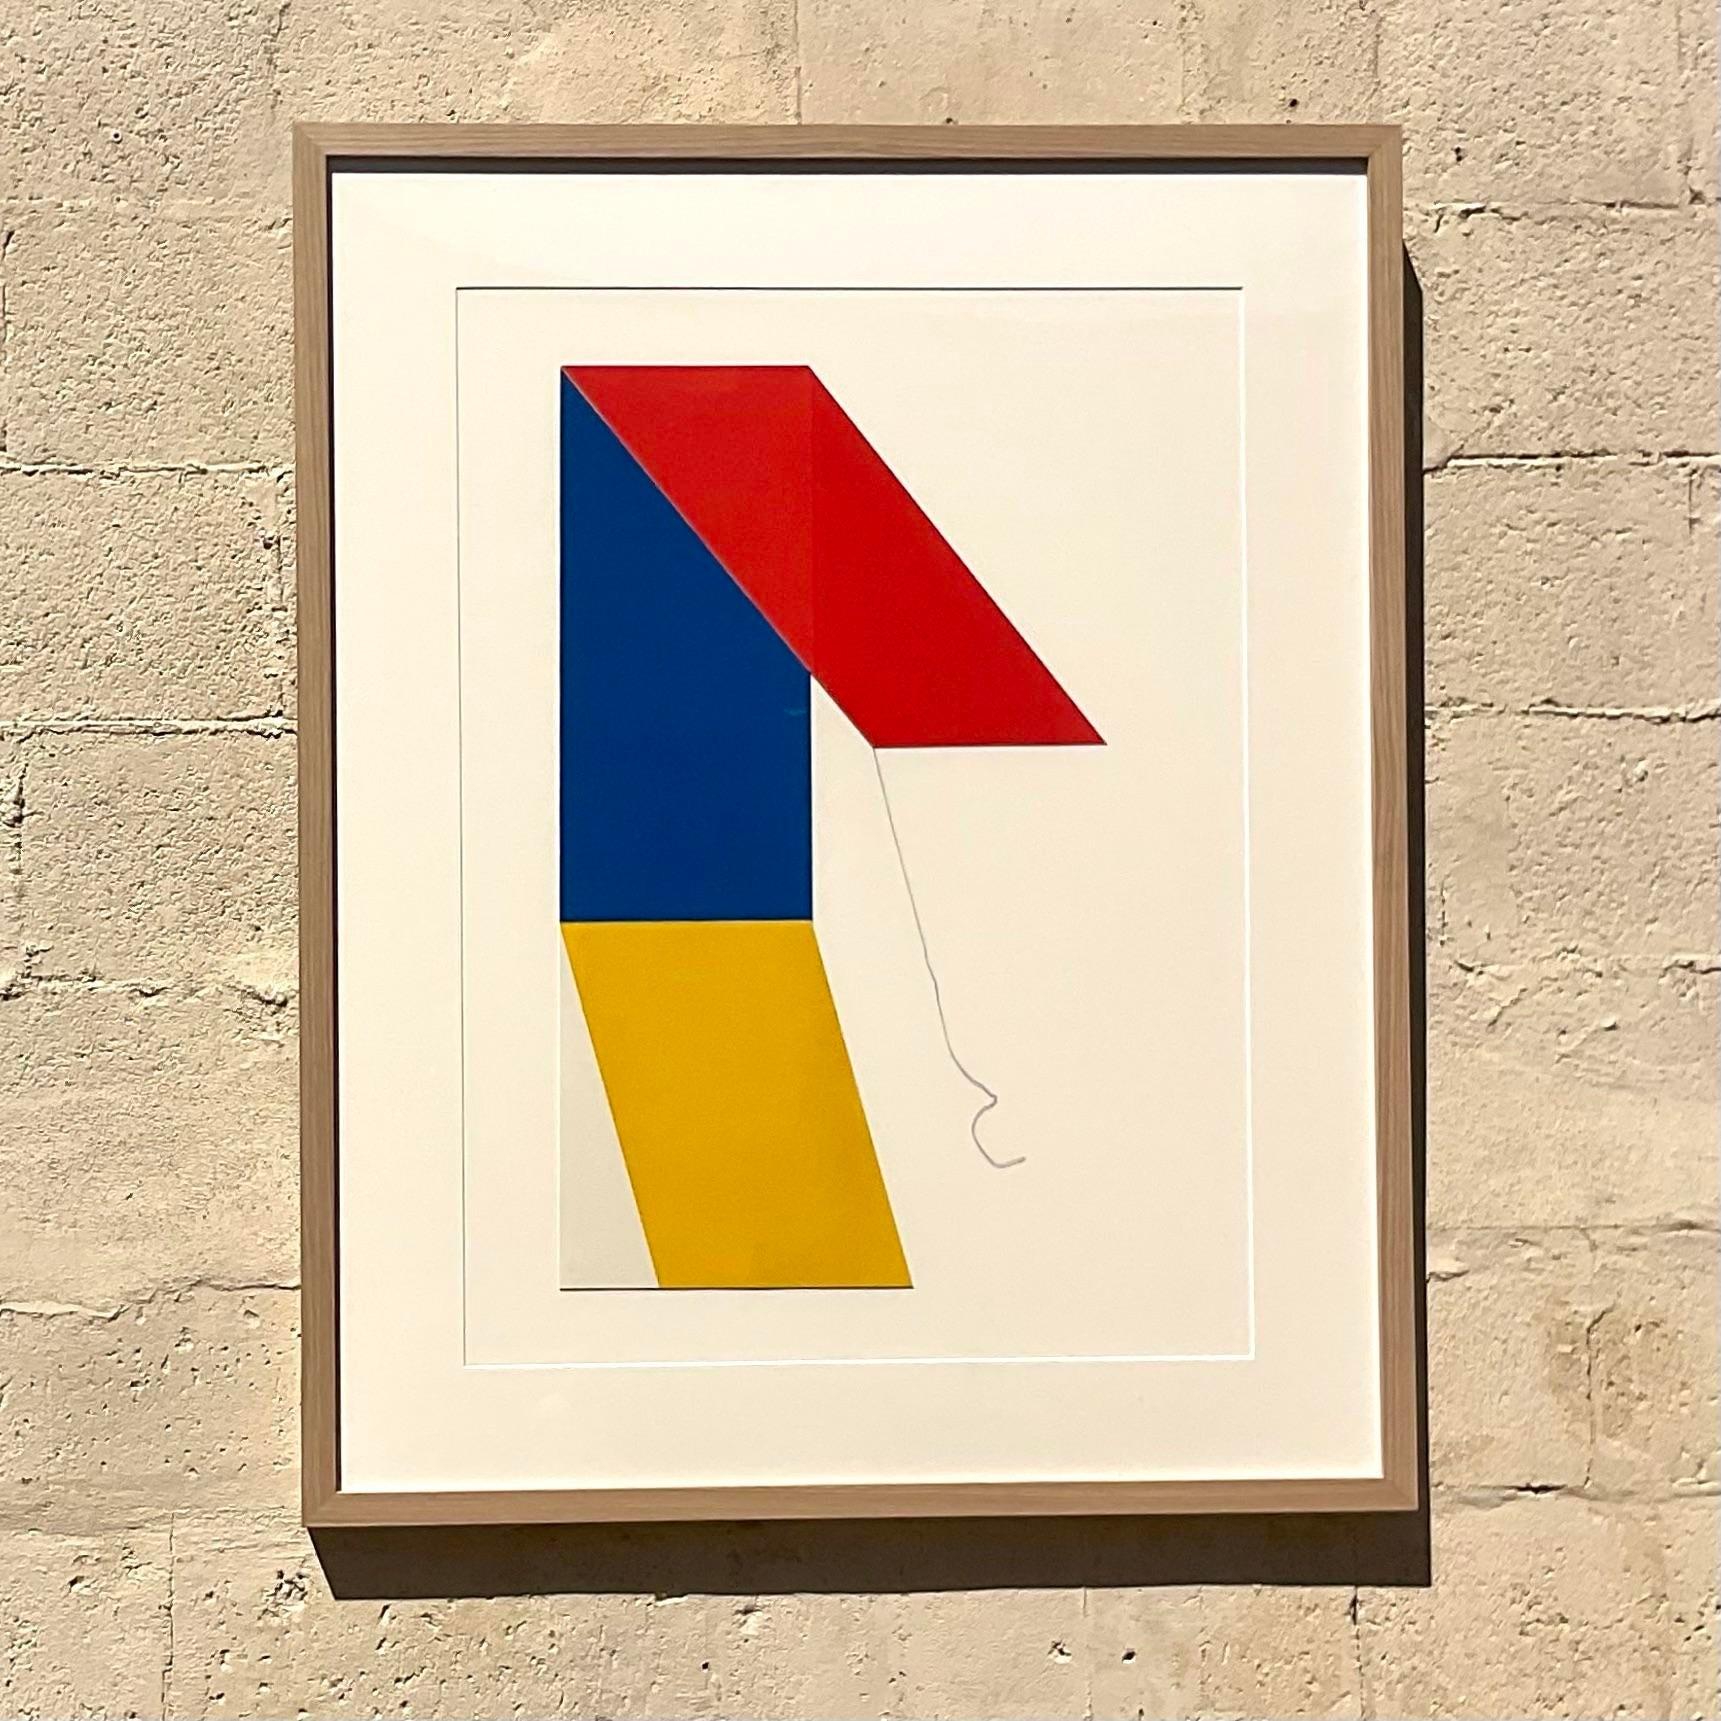 Vintage minimalistic painting of an abstract geometric object. The shape created appears 3 dimensional and the a subtle addition of colors makes this vintage piece tasteful and modern. Signed en verso by the artist. Acquired from a Palm beach estate.